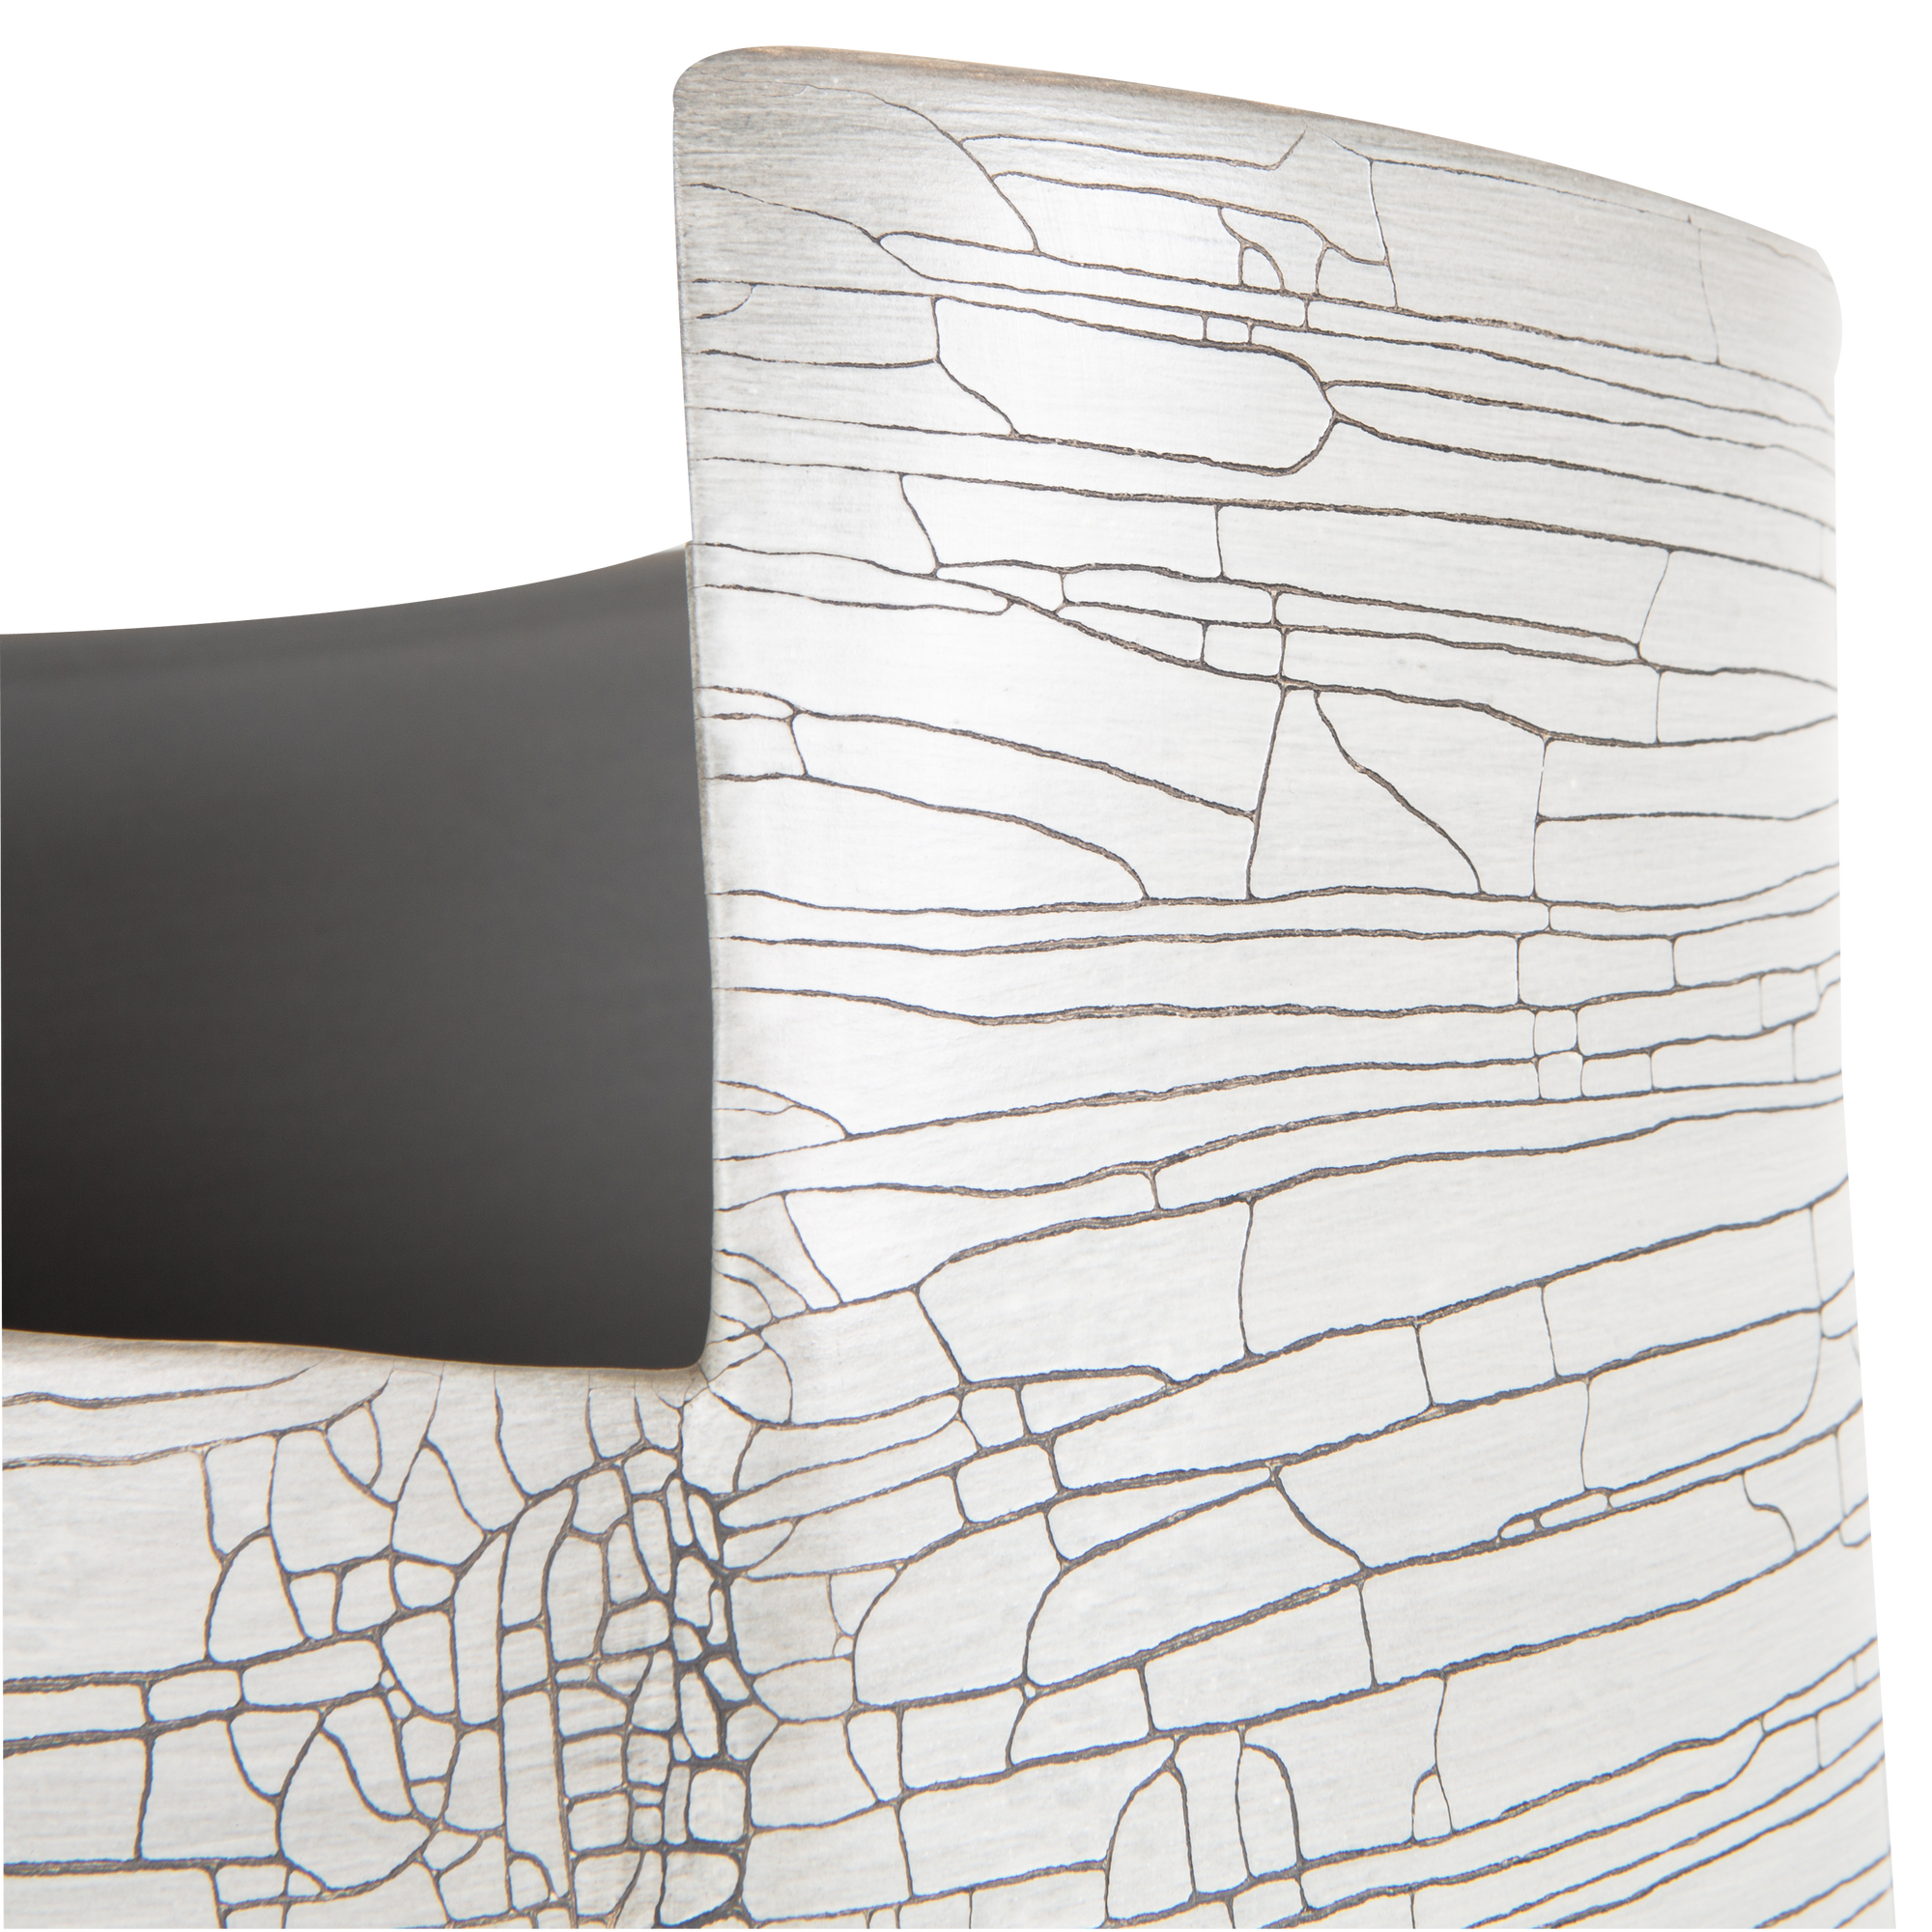 Defined by its intricate white crackle finish, the Torre Vase has a captivating spiraling rim with an eye-catching curved silhouette.